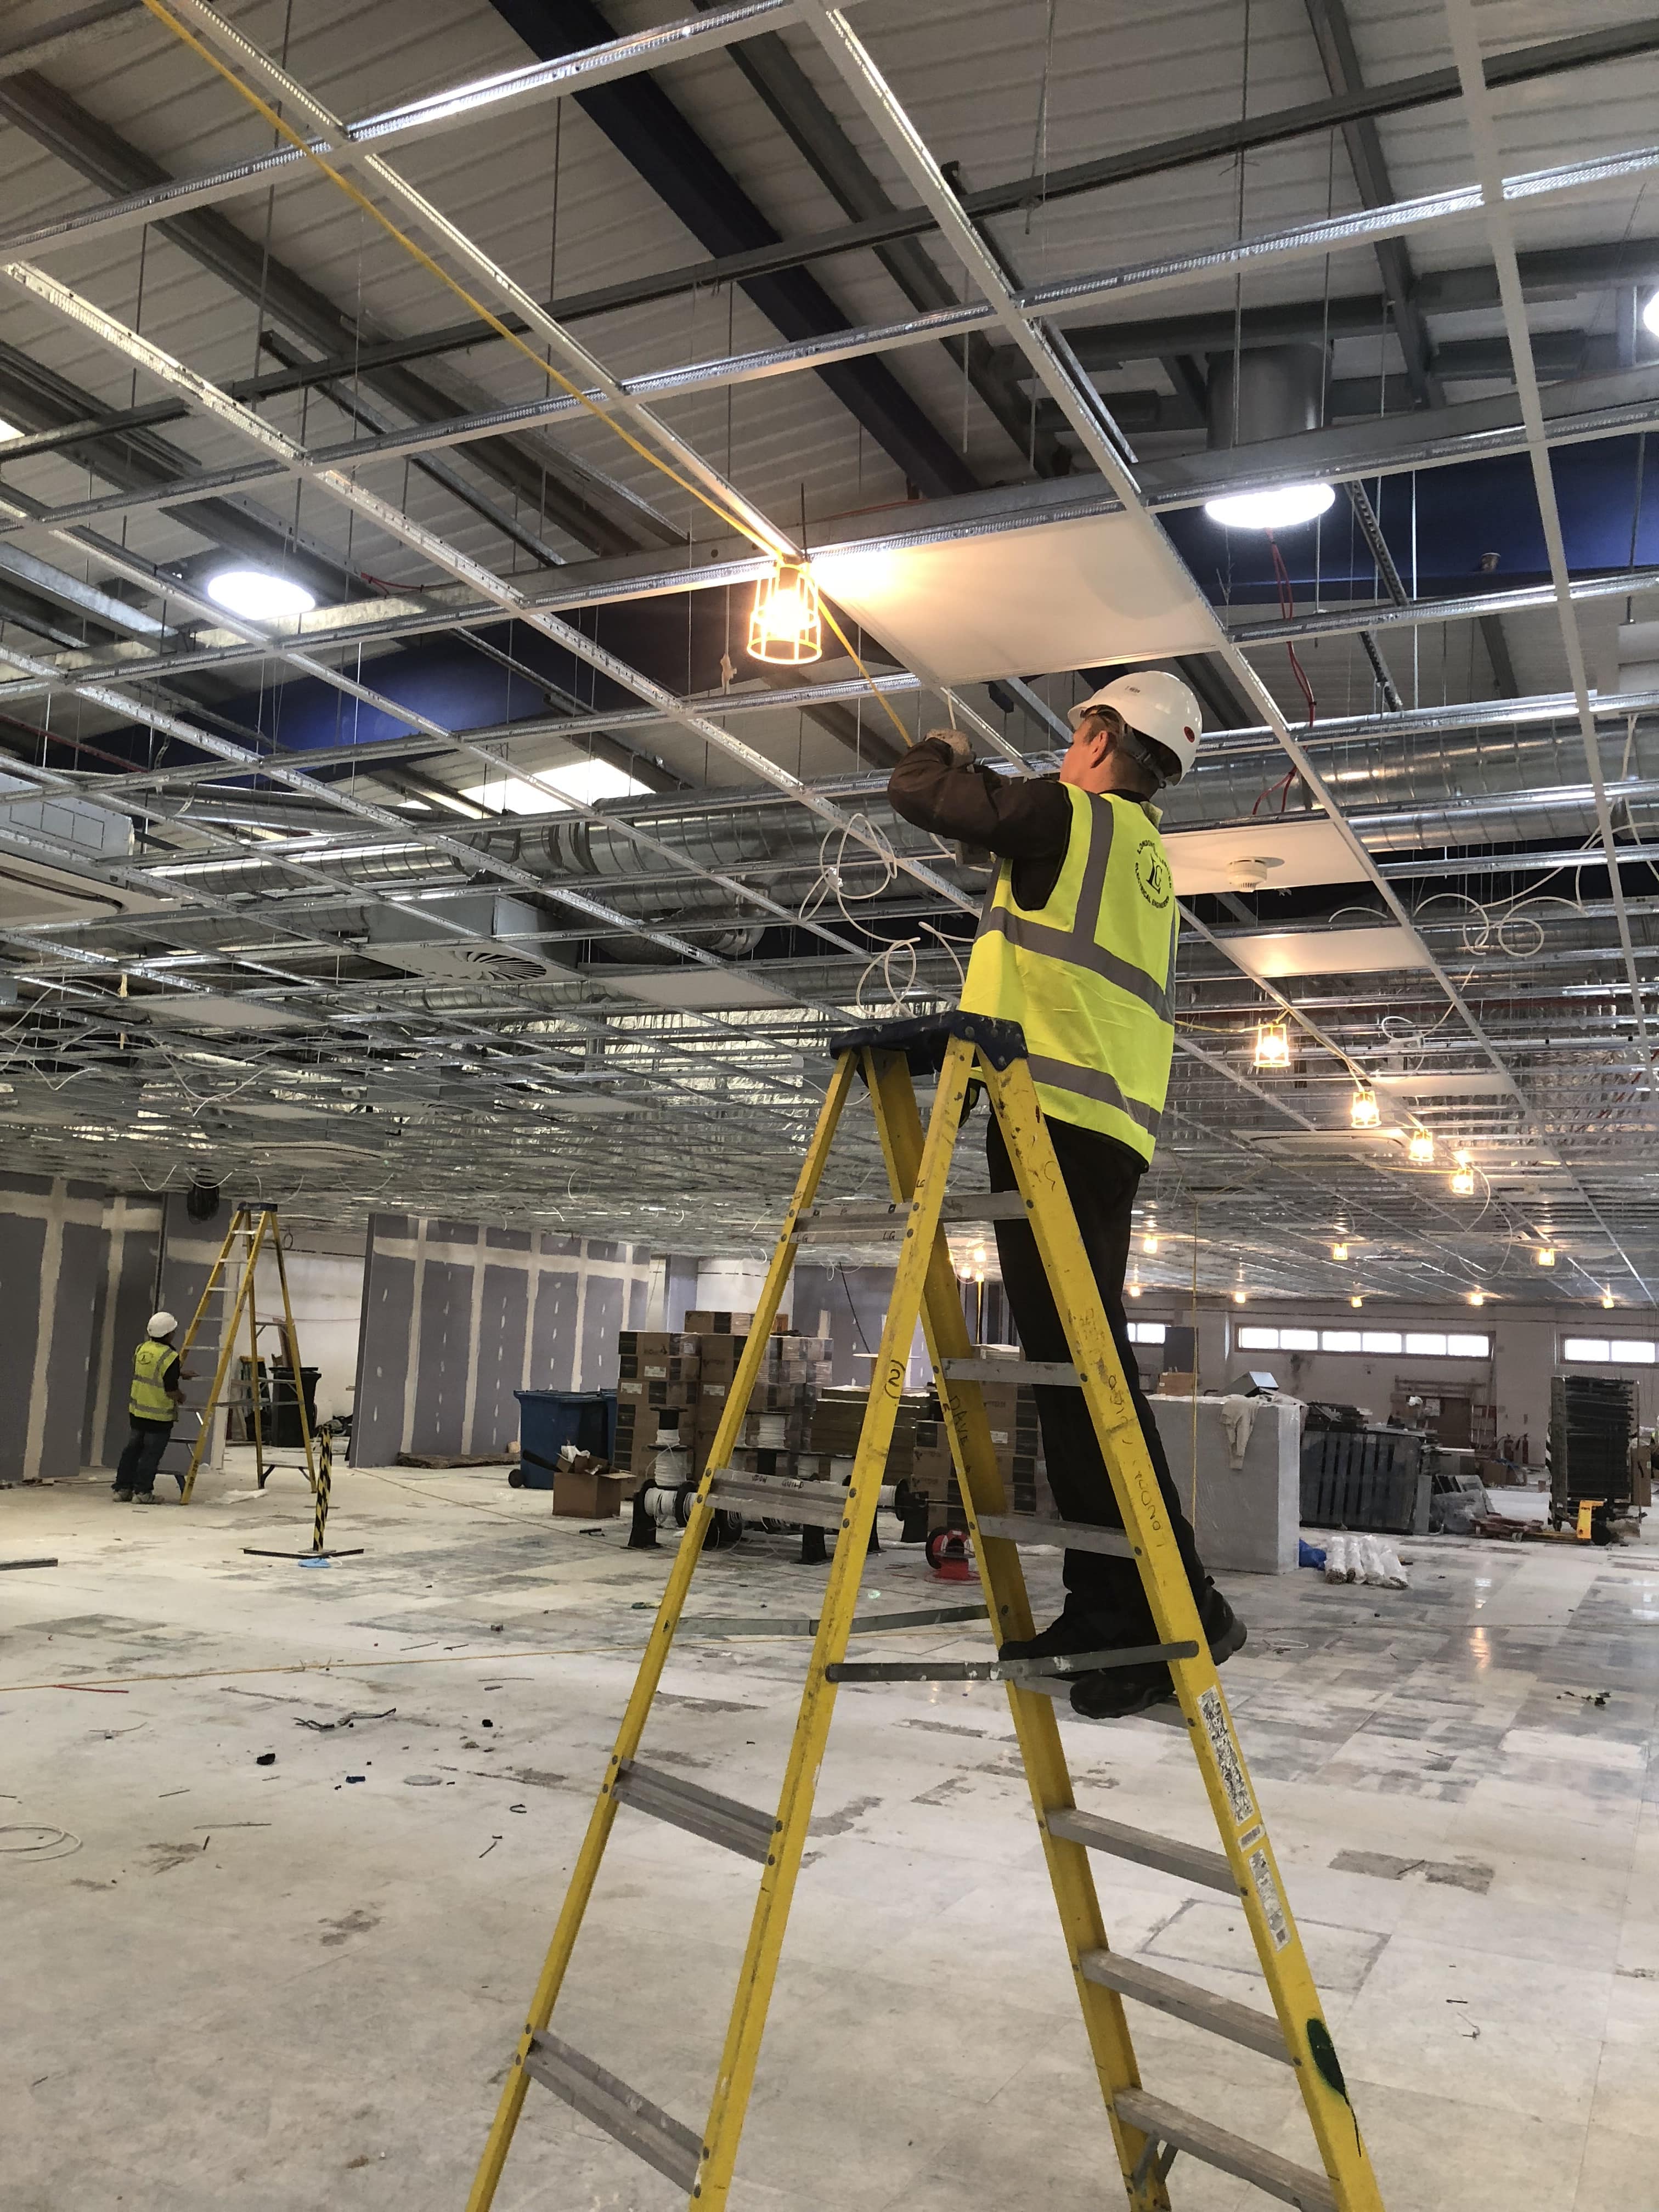 Lights being fitted into an office ceiling